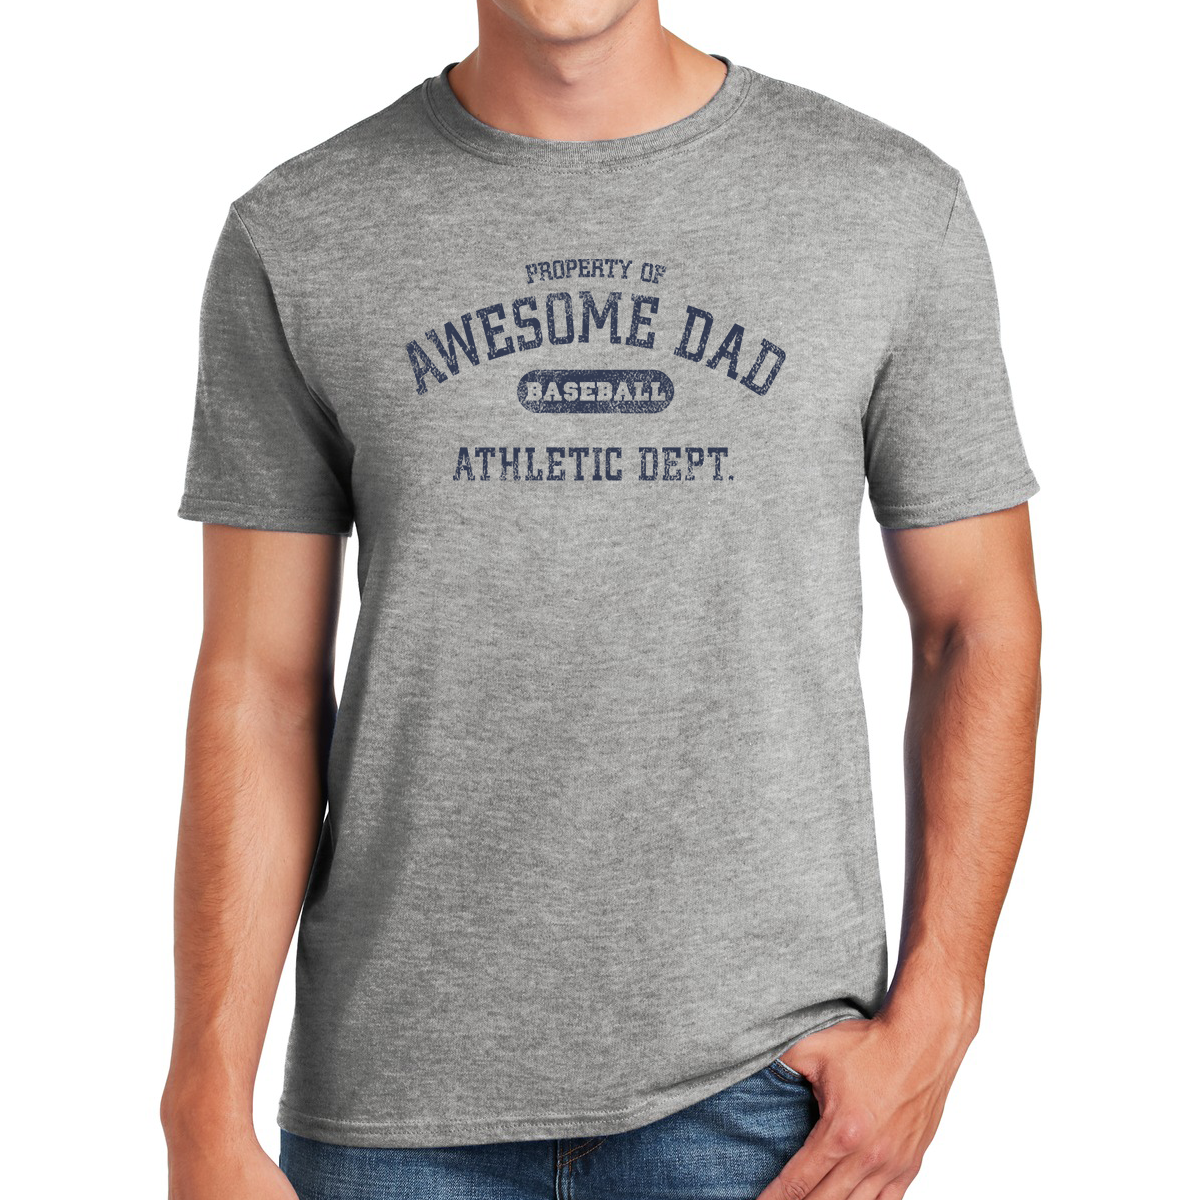 Property Of Awesome Dad Baseball Athletic Dept. Awesome Dad T-shirt